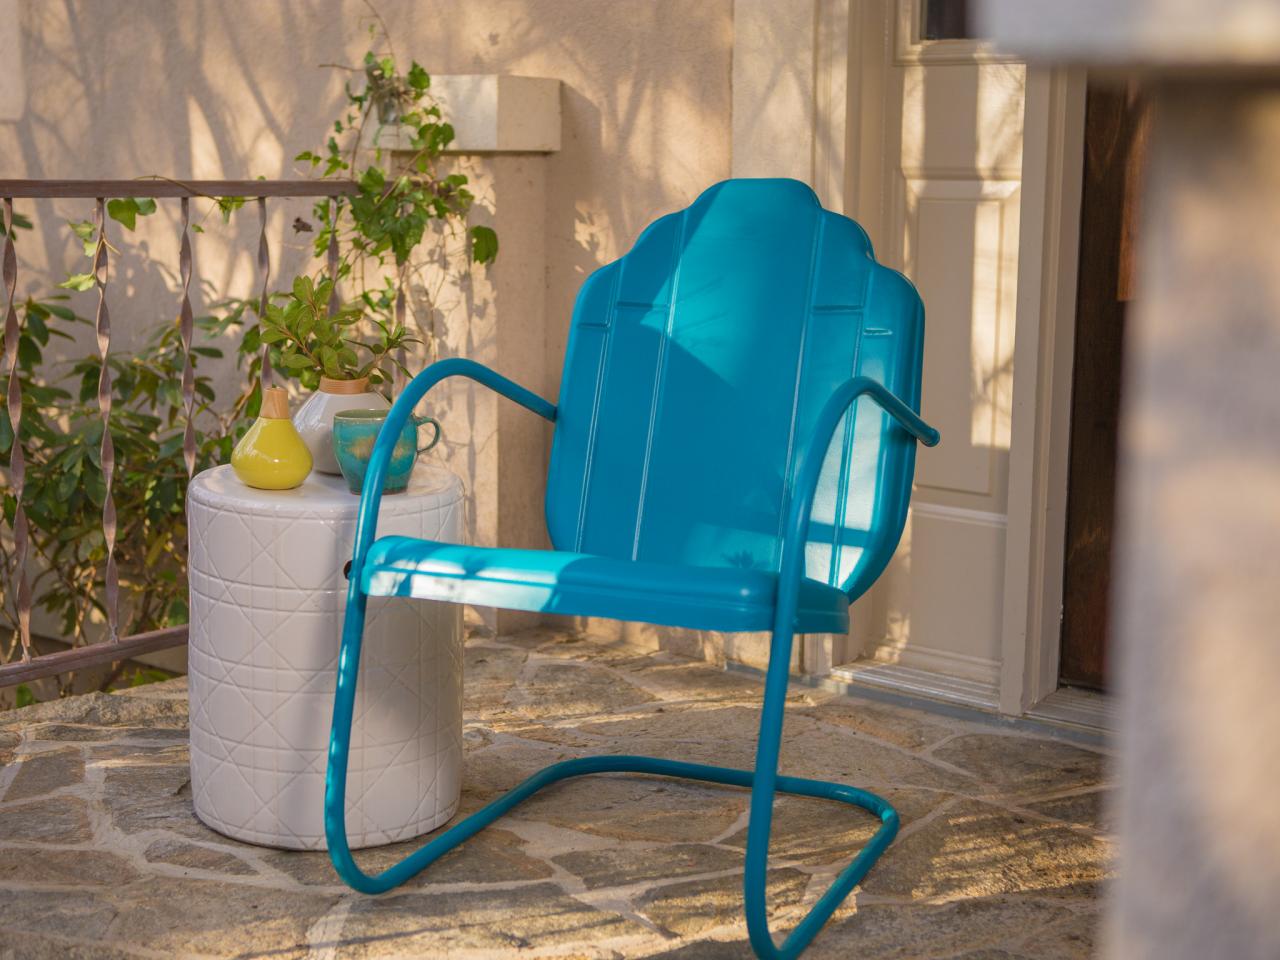 How To Paint An Outdoor Metal Chair, Can You Paint Wrought Iron Furniture